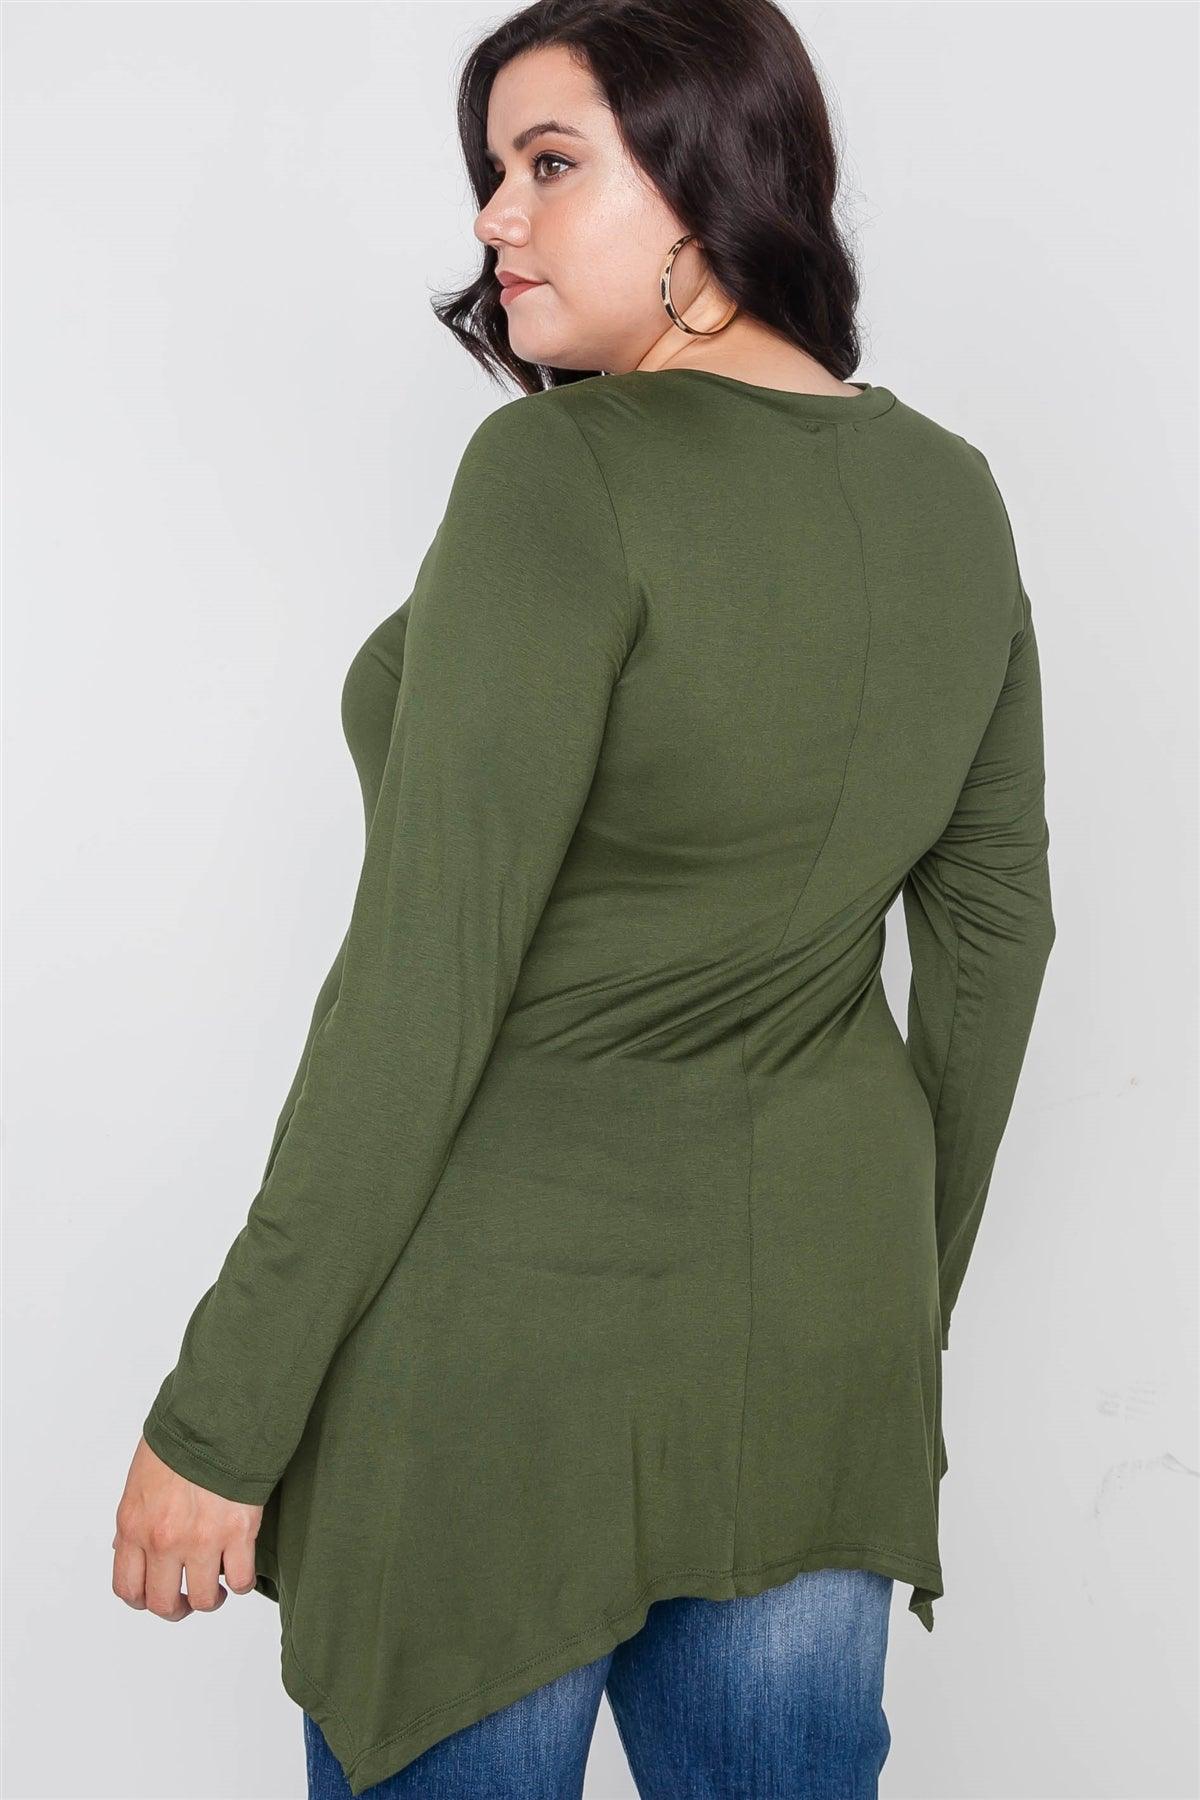 Plus Size Olive Green Long Sleeve Basic Top